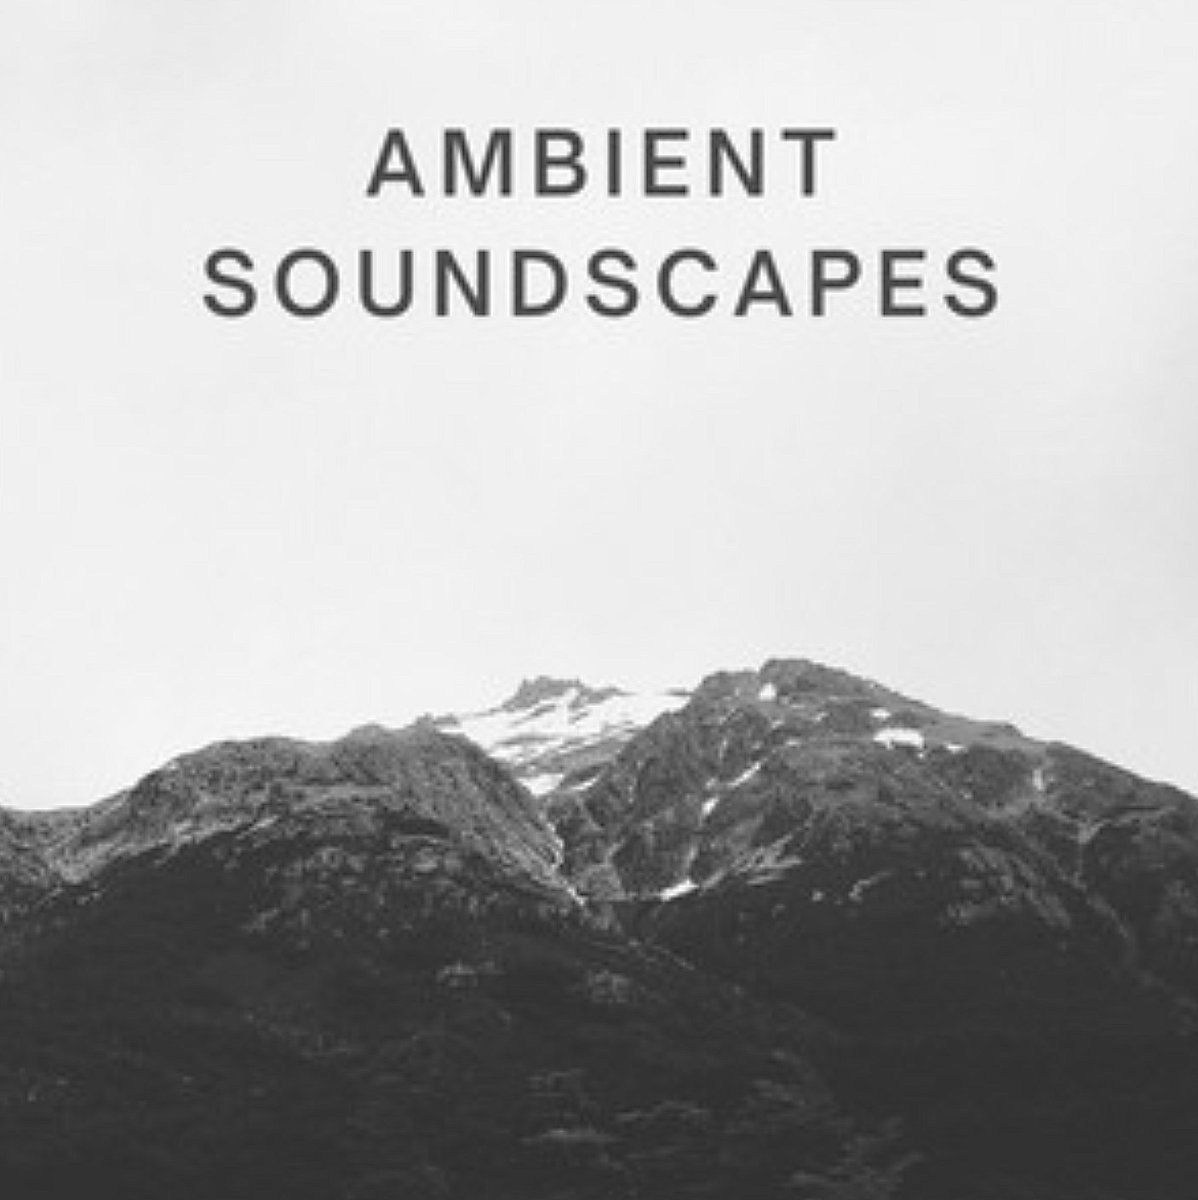 Ambient Playlist of the Day AMBIENT SOUNDSCAPES tinyurl.com/ypyscrb9 curated by Lauge @AmbientScps Thx4 adding METRIC SYSTEM 1981 tinyurl.com/mr3uhj8m @ValleyVRecords #ambient #spotify #metricsystem1981 #ambientsoundscapes #lauge #valleyviewrecords #salonblanc #playlist